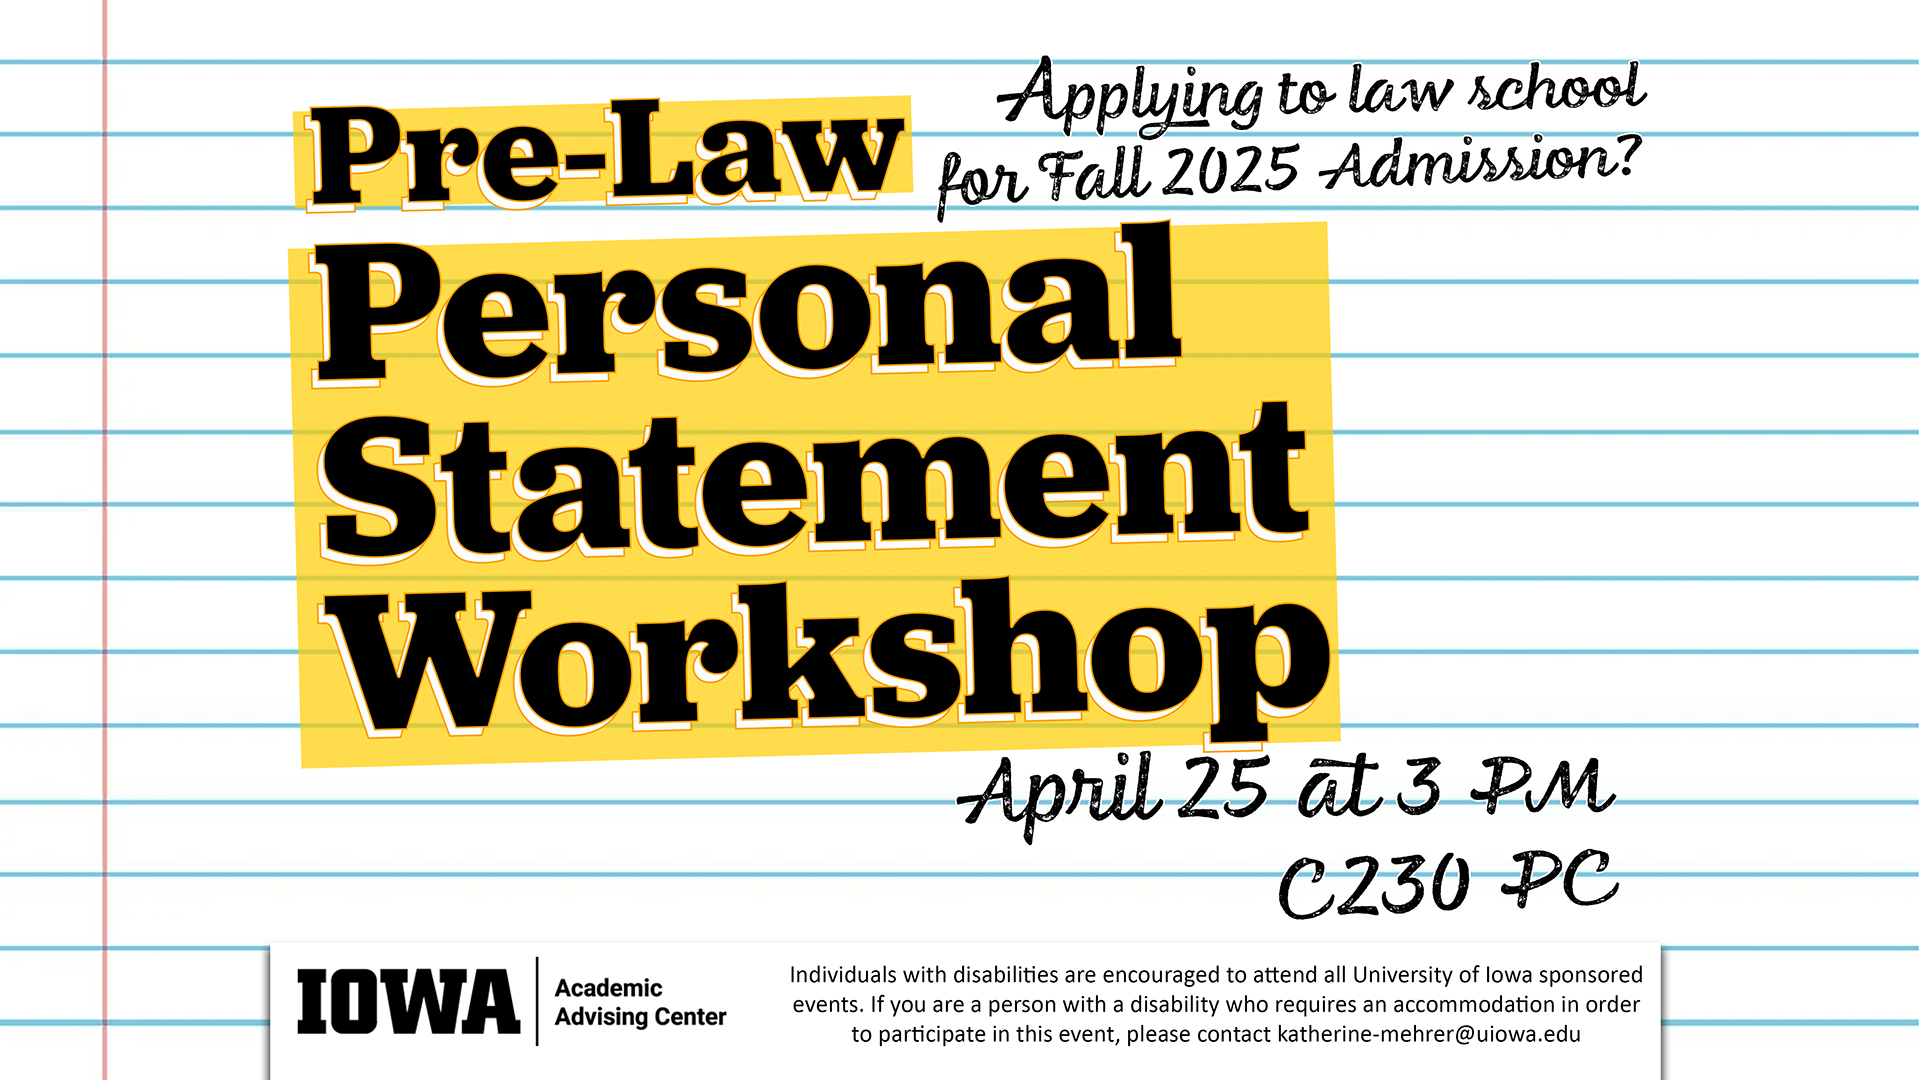 colorful flyer with information for pre-law statement workshop event